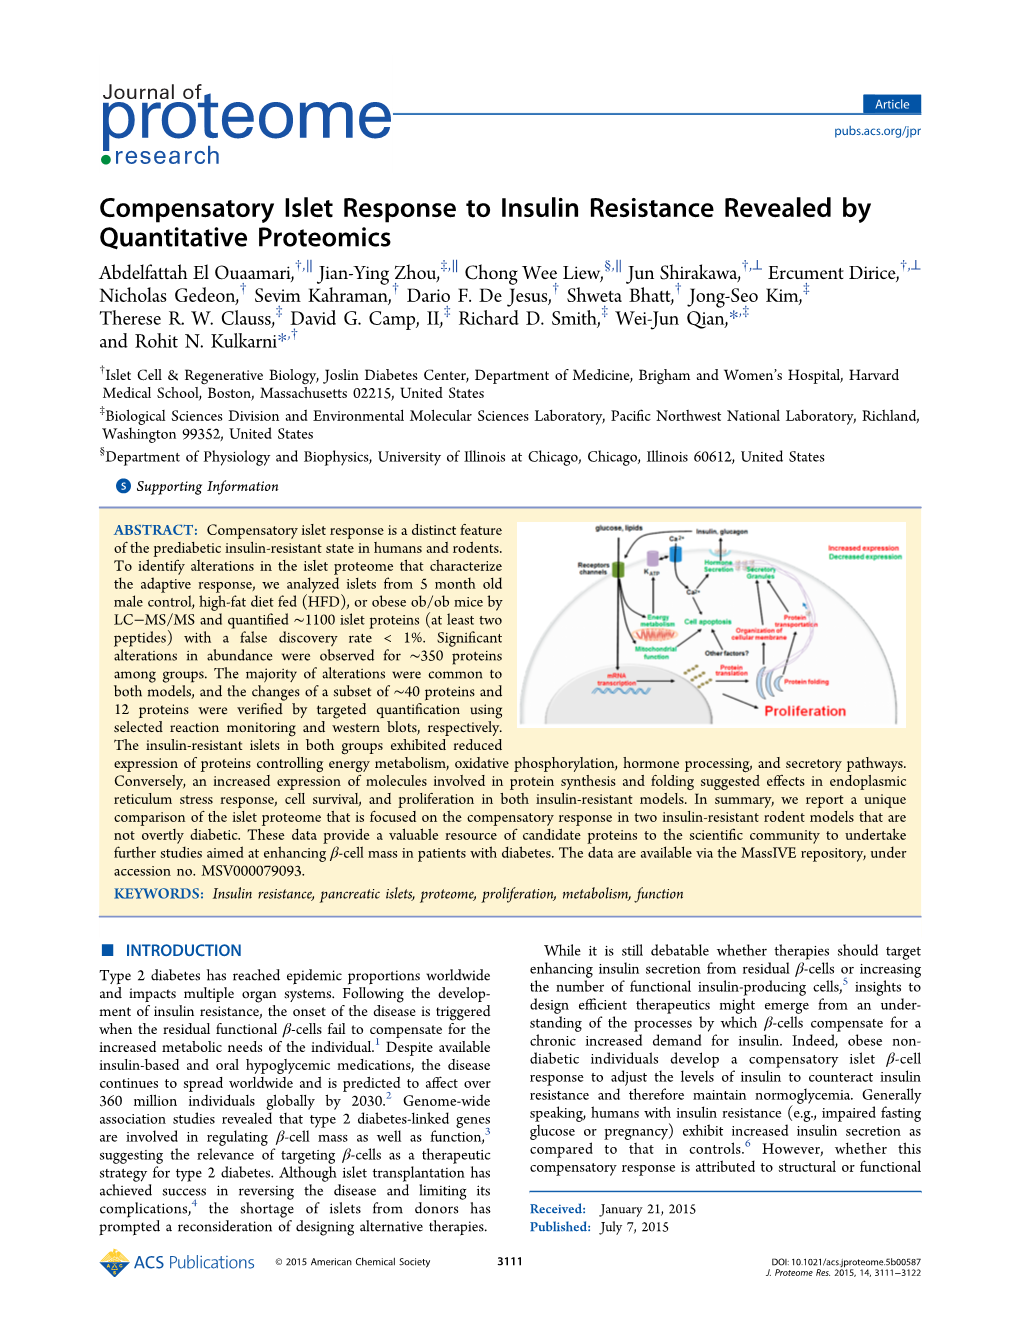 Compensatory Islet Response to Insulin Resistance Revealed by Quantitative Proteomics